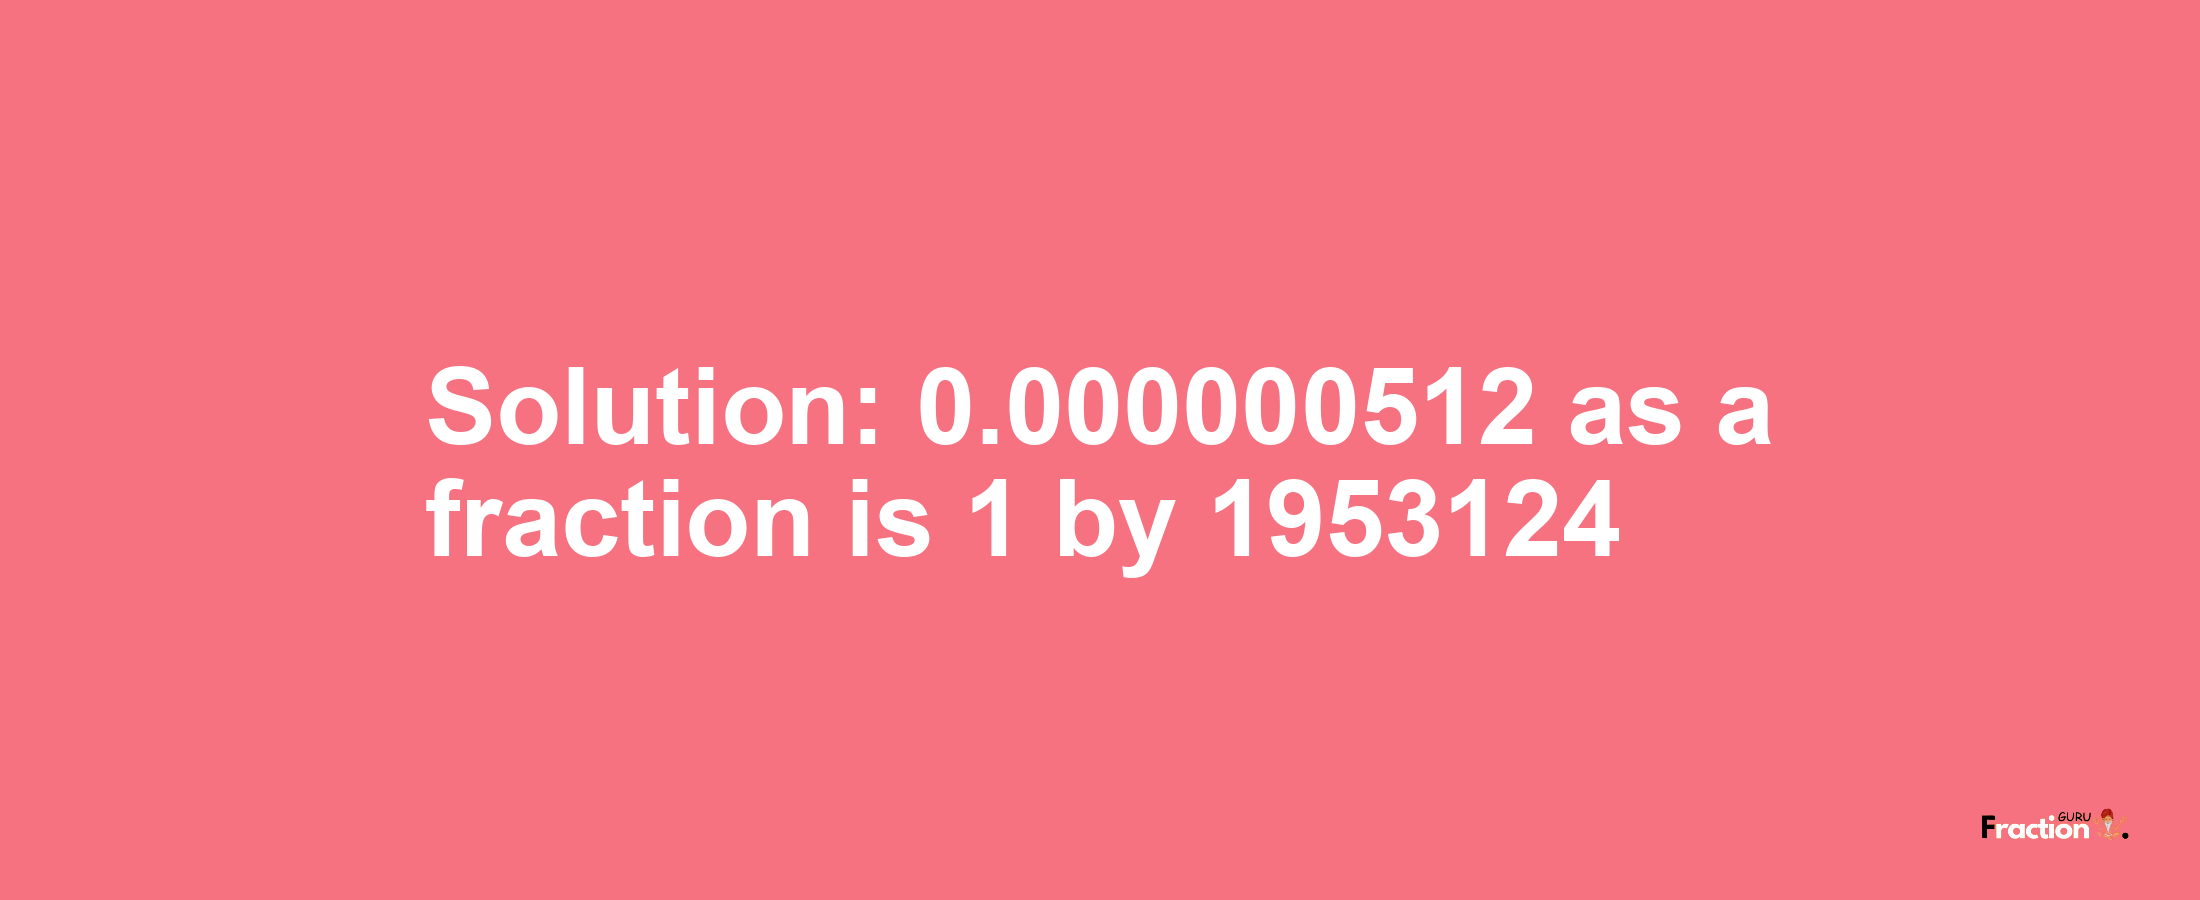 Solution:0.000000512 as a fraction is 1/1953124